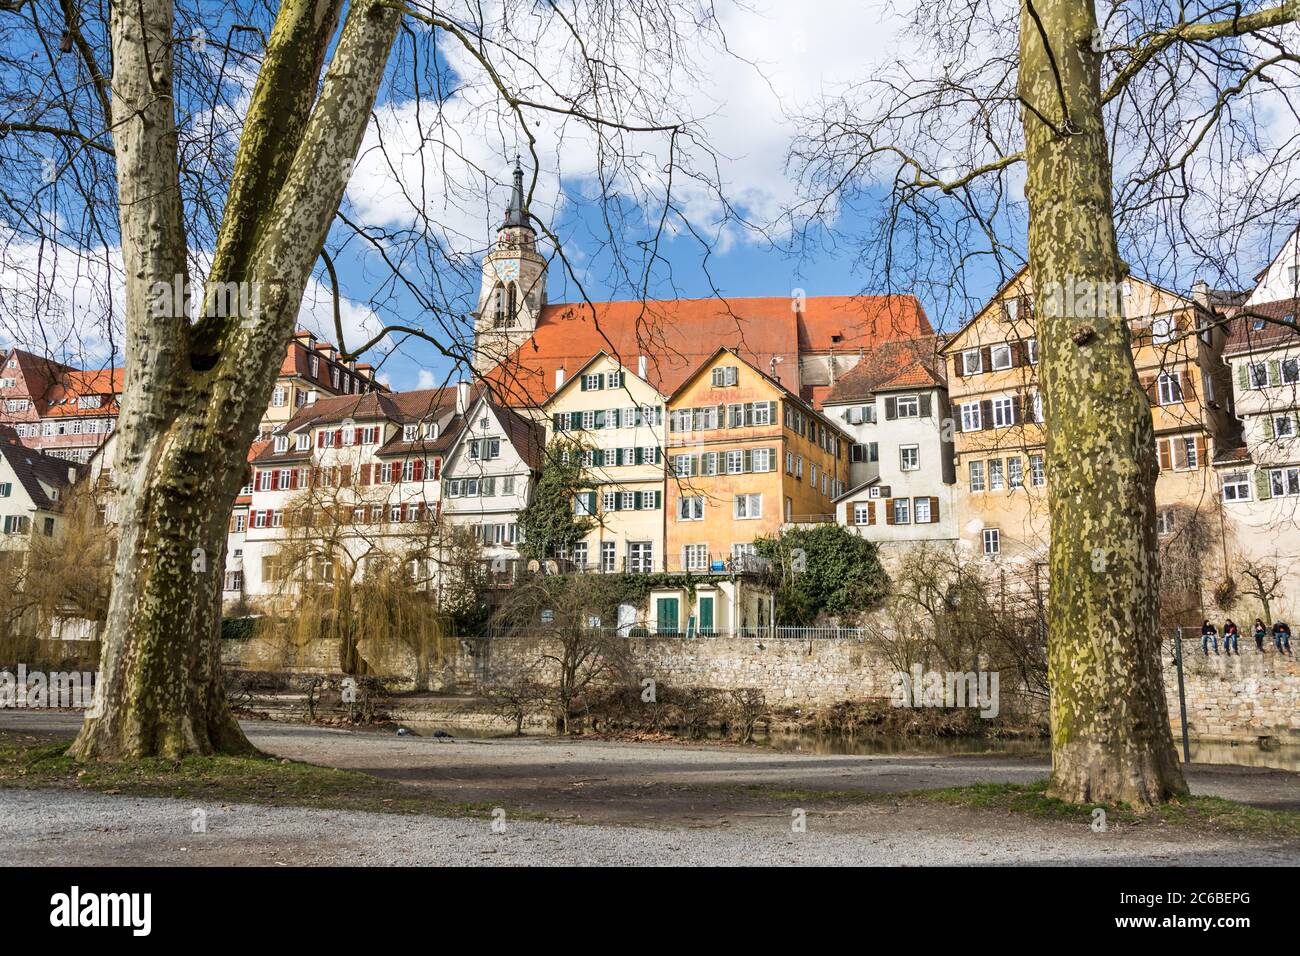 Old town and park of Tübingen, Germany Stock Photo